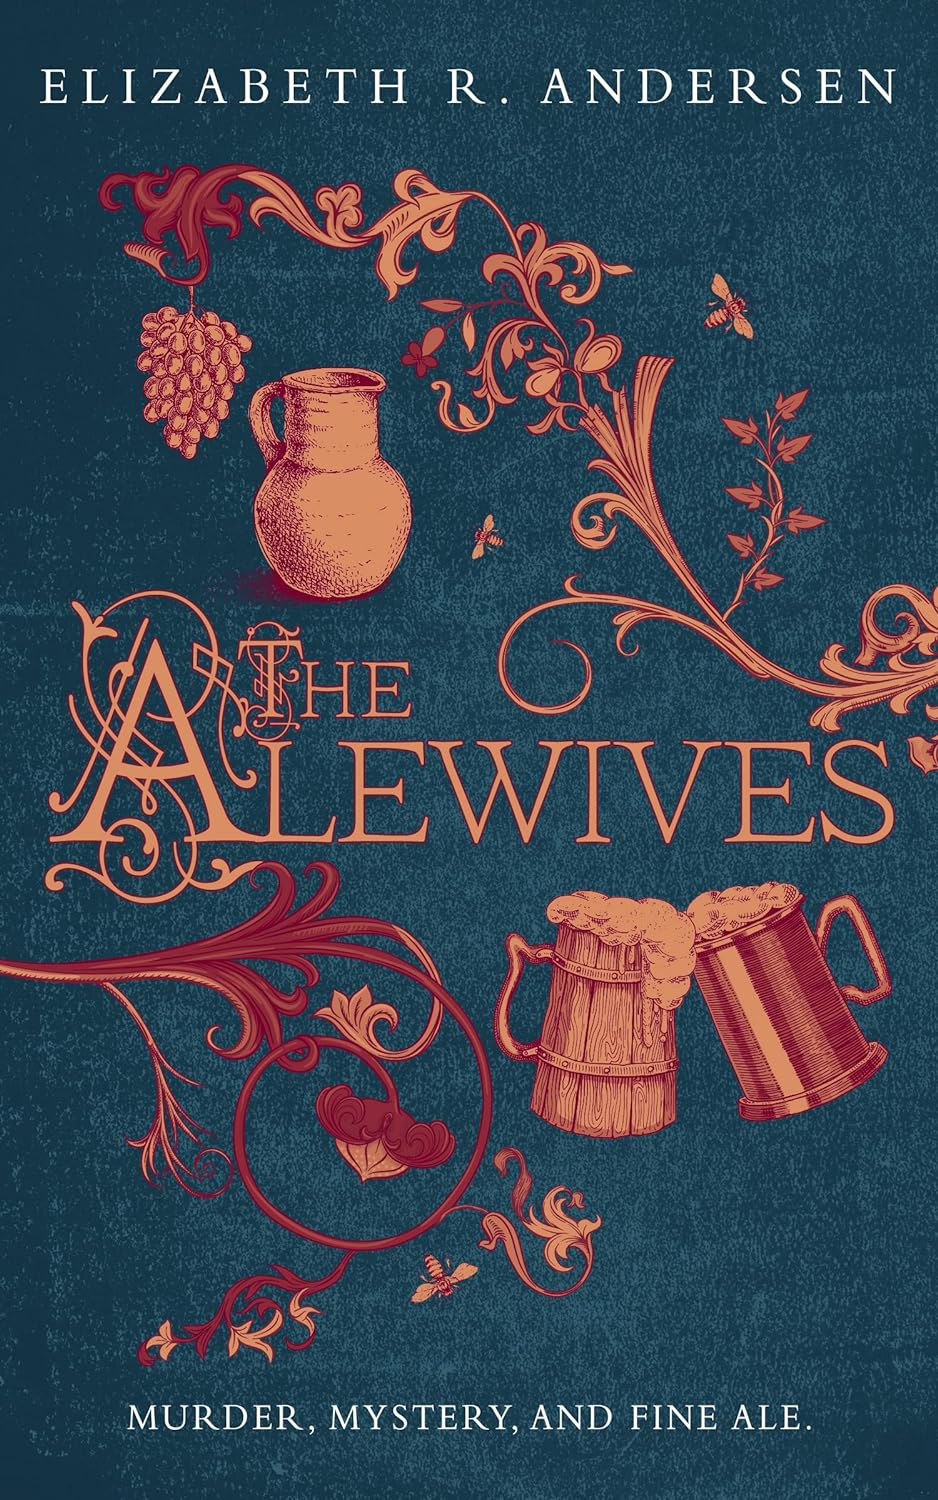 The Alewives by Elizabeth R Andersen is reduced in the UK, Australia and Canada for a very limited time #mystery #historicalmystery #bookbargain #Highly Recommended